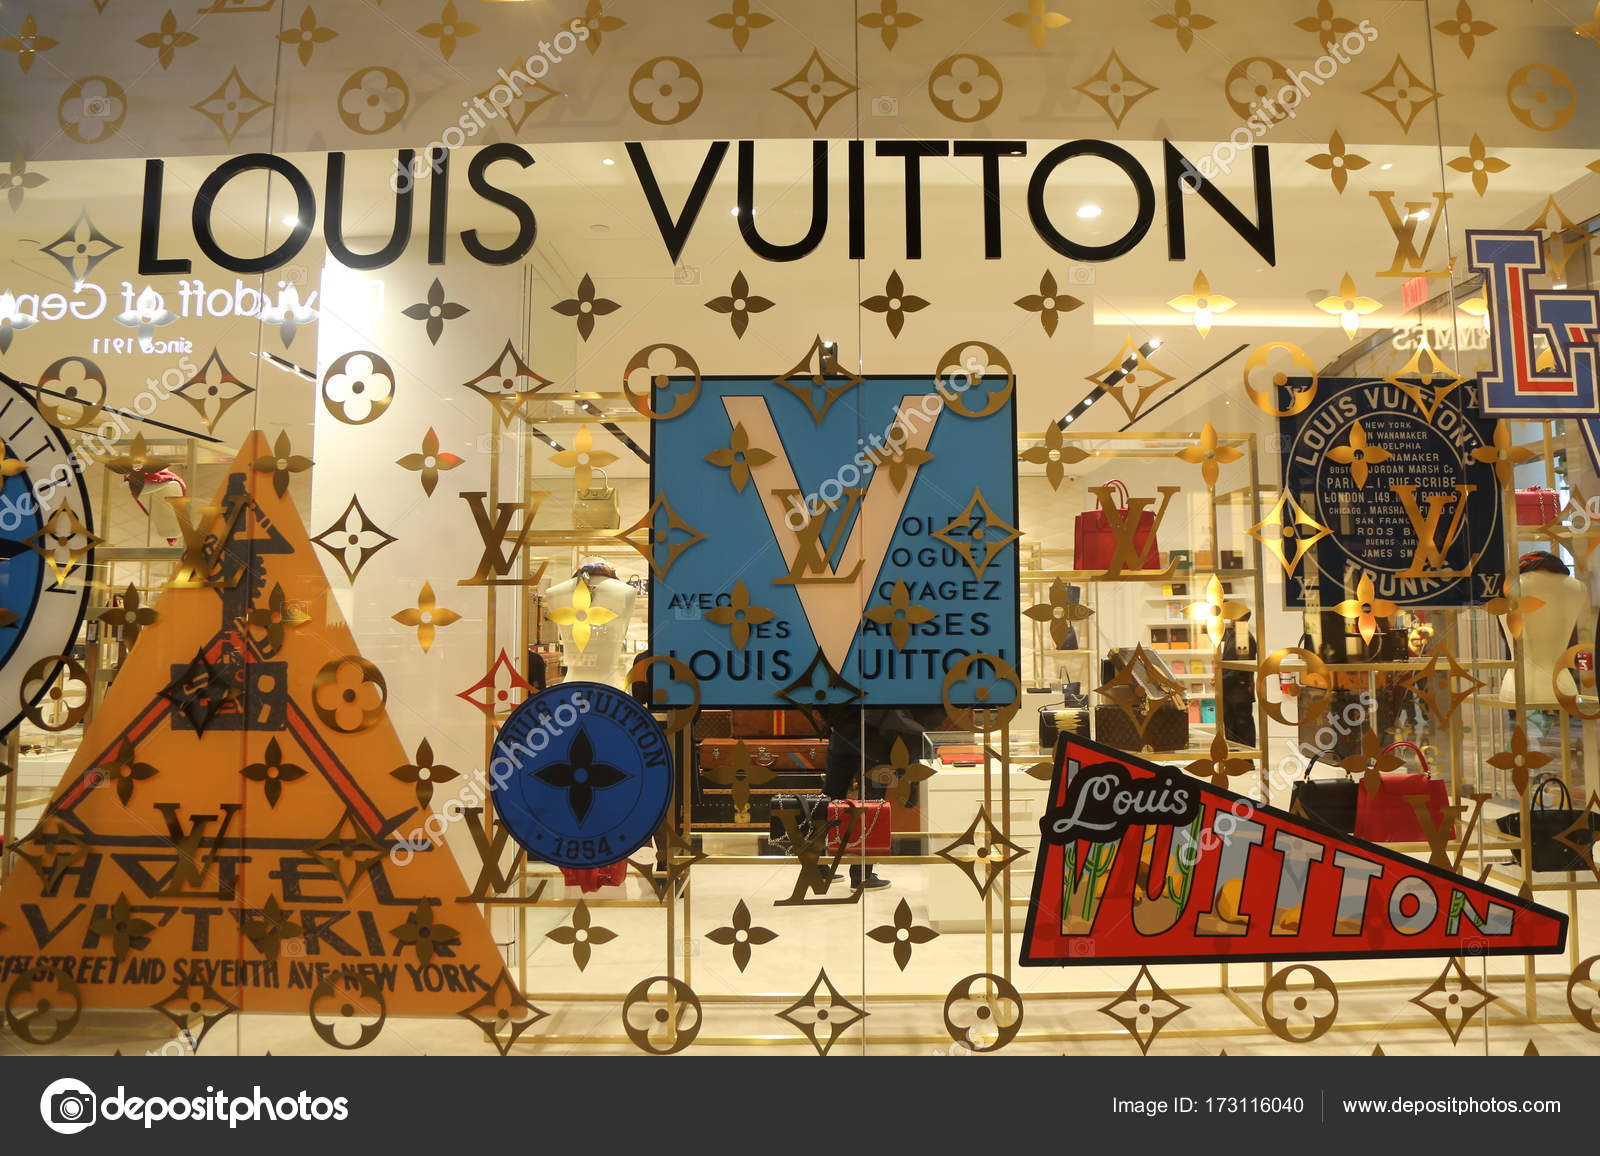 Louis Vuitton Opens Expanded Brookfield Place Location in Lower Manhattan